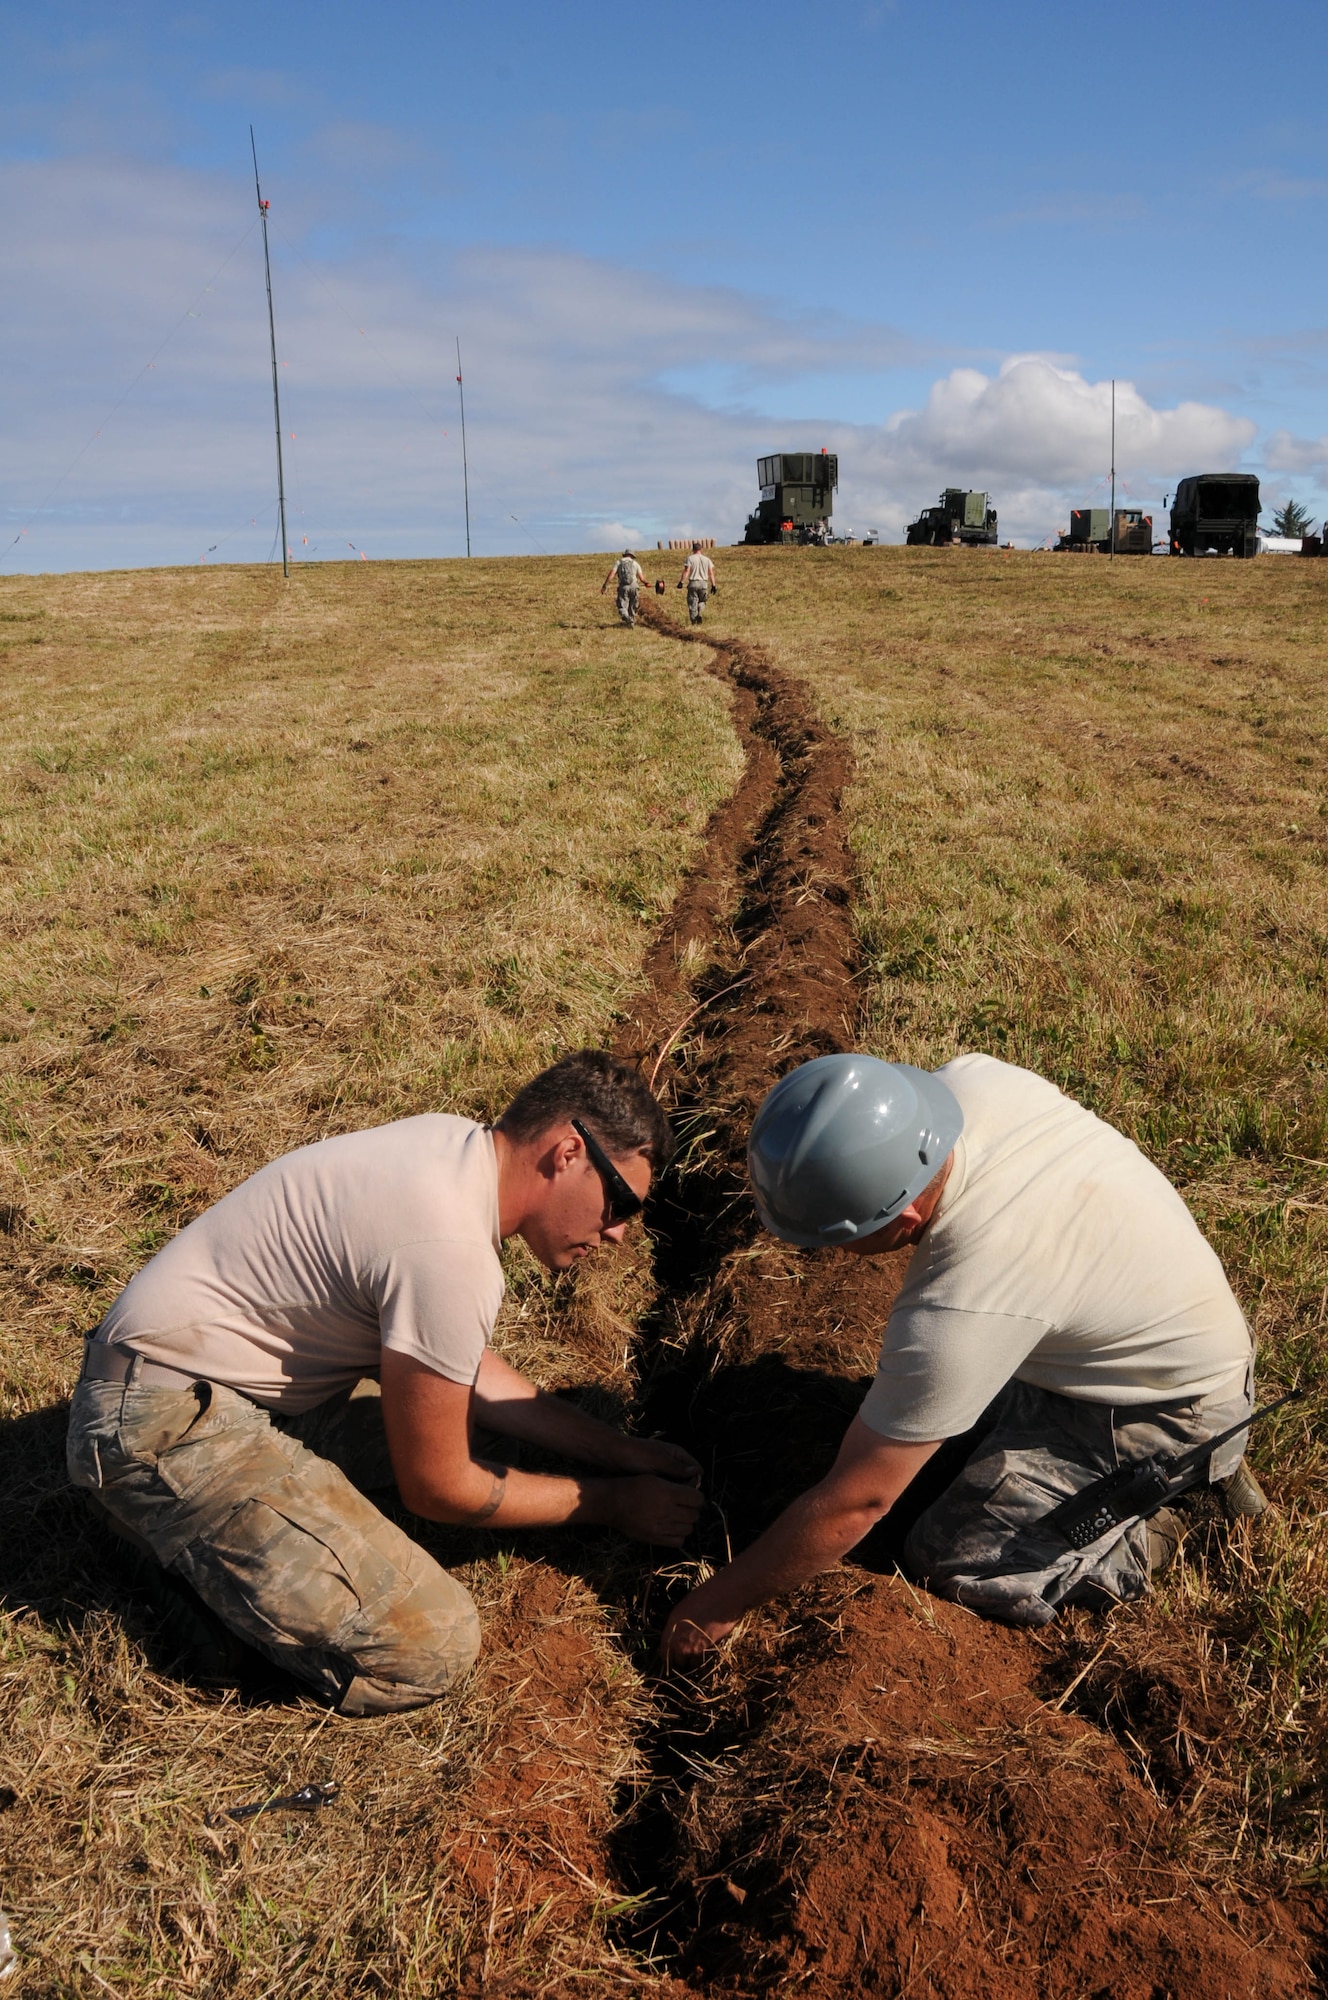 Oregon Air National Guard members, 270th Air Traffic Control Squadron, lay down copper wire for the grounding system during the ATCS annual training at Newport, Ore., Aug. 10, 2016. Members convoyed nearly 300 miles from Klamath Falls, Ore., where they set up their MSN-7 mobile tower, TRN-48 Tactical Air Navigation (TACAN) system, and all supporting equipment which allows them to guide aircraft into and out of nearly any airfield in the world. (U.S. Air National Guard photo by Staff Sgt. Penny Snoozy)